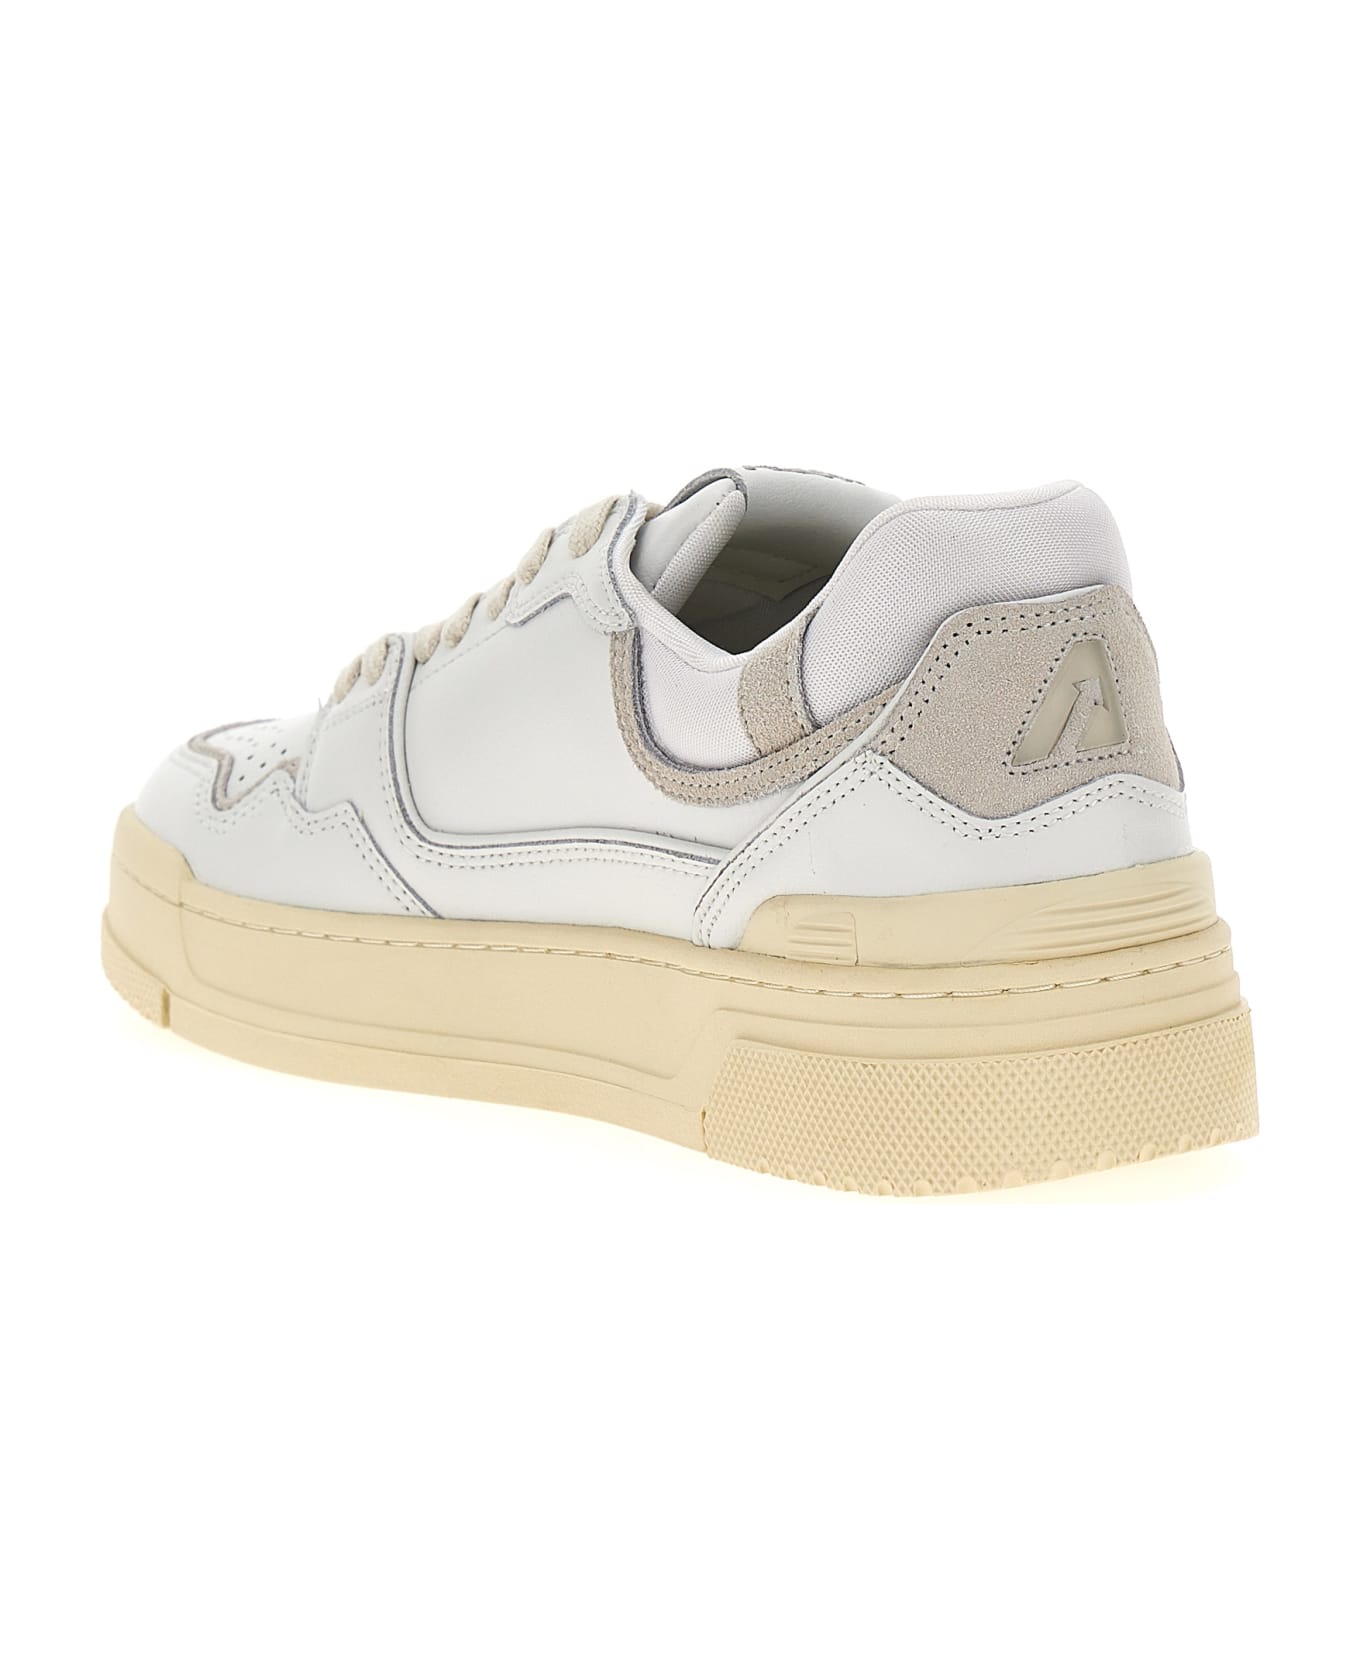 Autry Clc Low-top Sneakers - White スニーカー